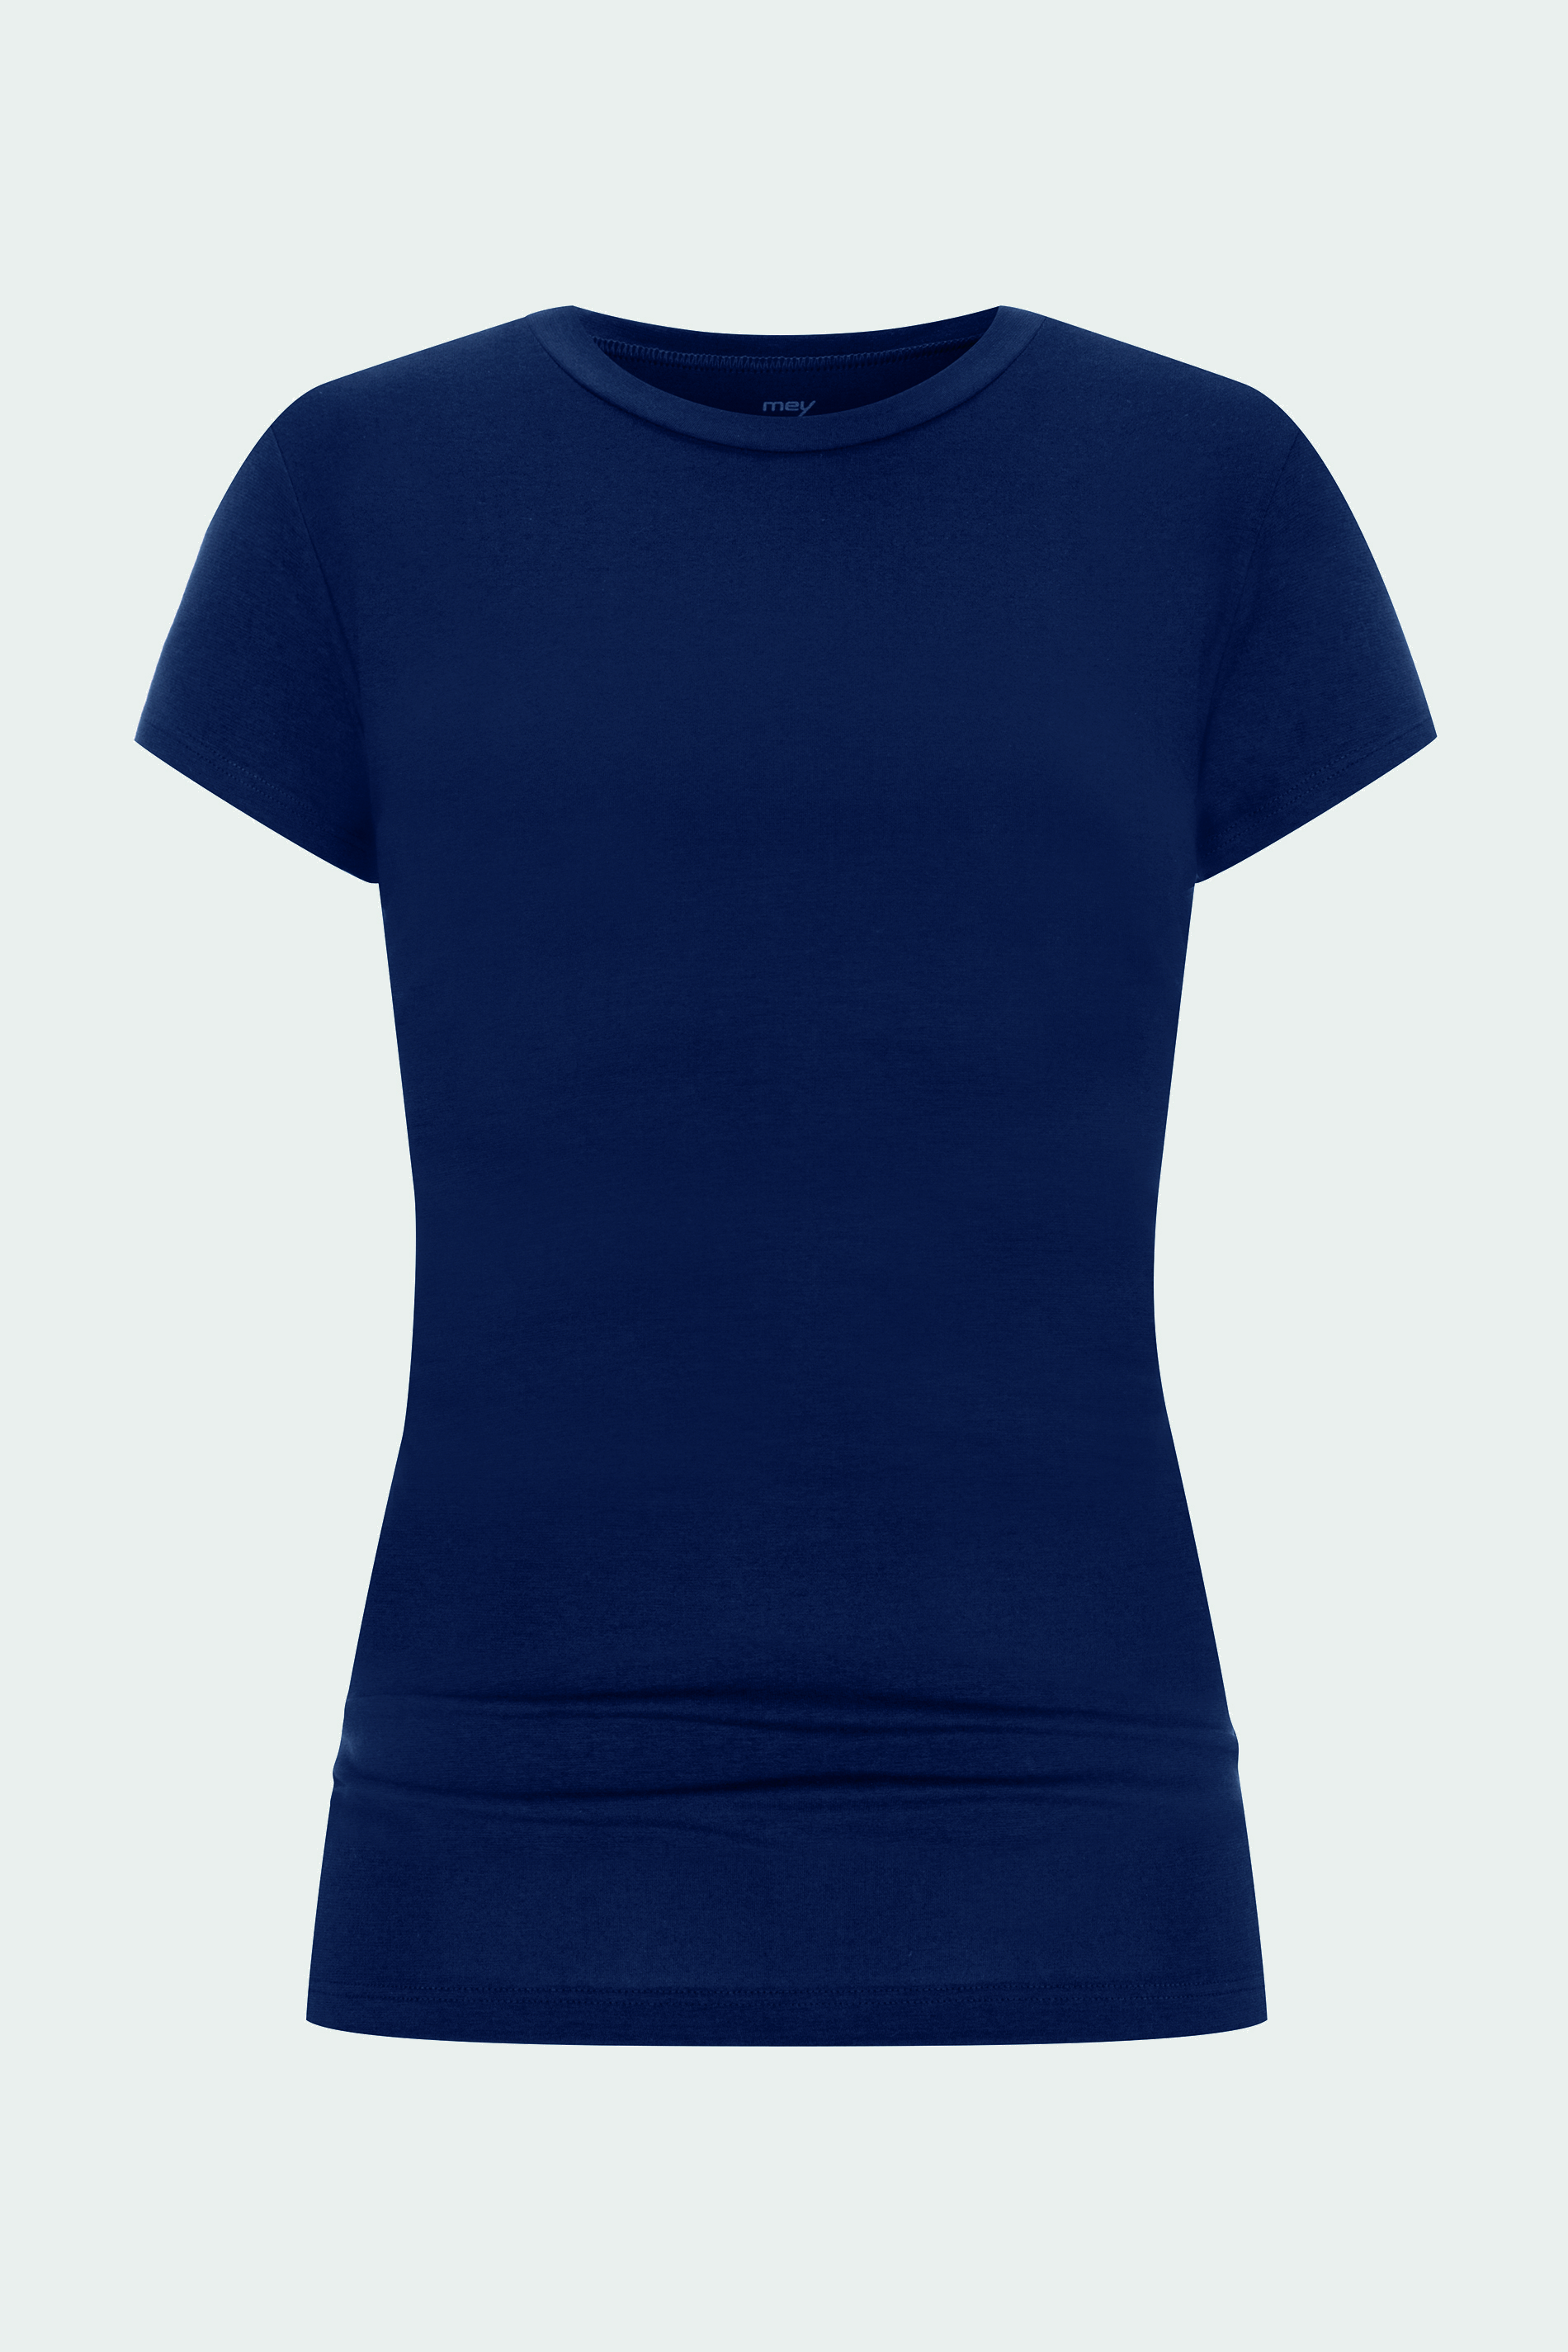 T-Shirt Night Blue Serie Cotton Pure Uitknippen | mey®